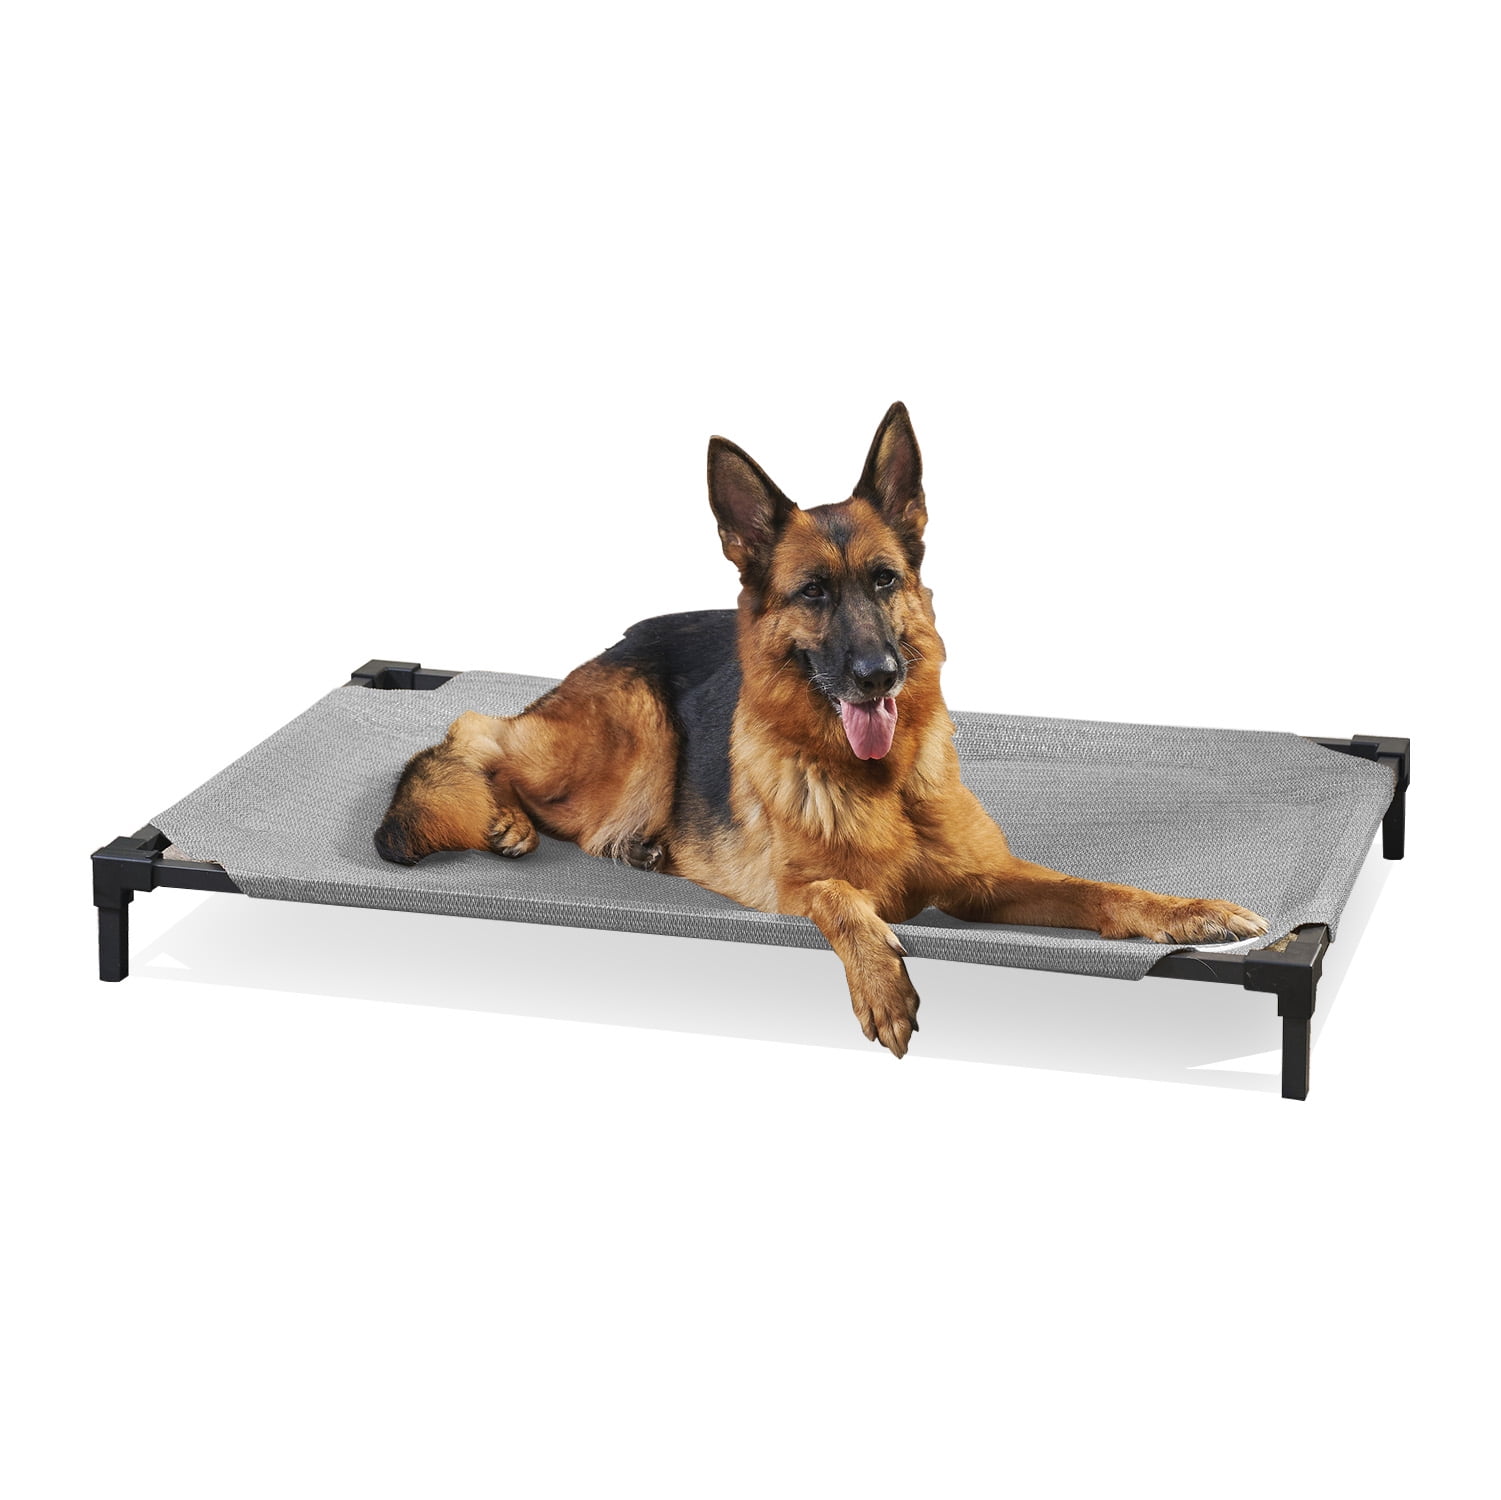 Coolaroo Cooling Elevated Pet Bed Pro (Large, Steel Grey) $19.85  + Free S&H w/ Walmart+ or $35+